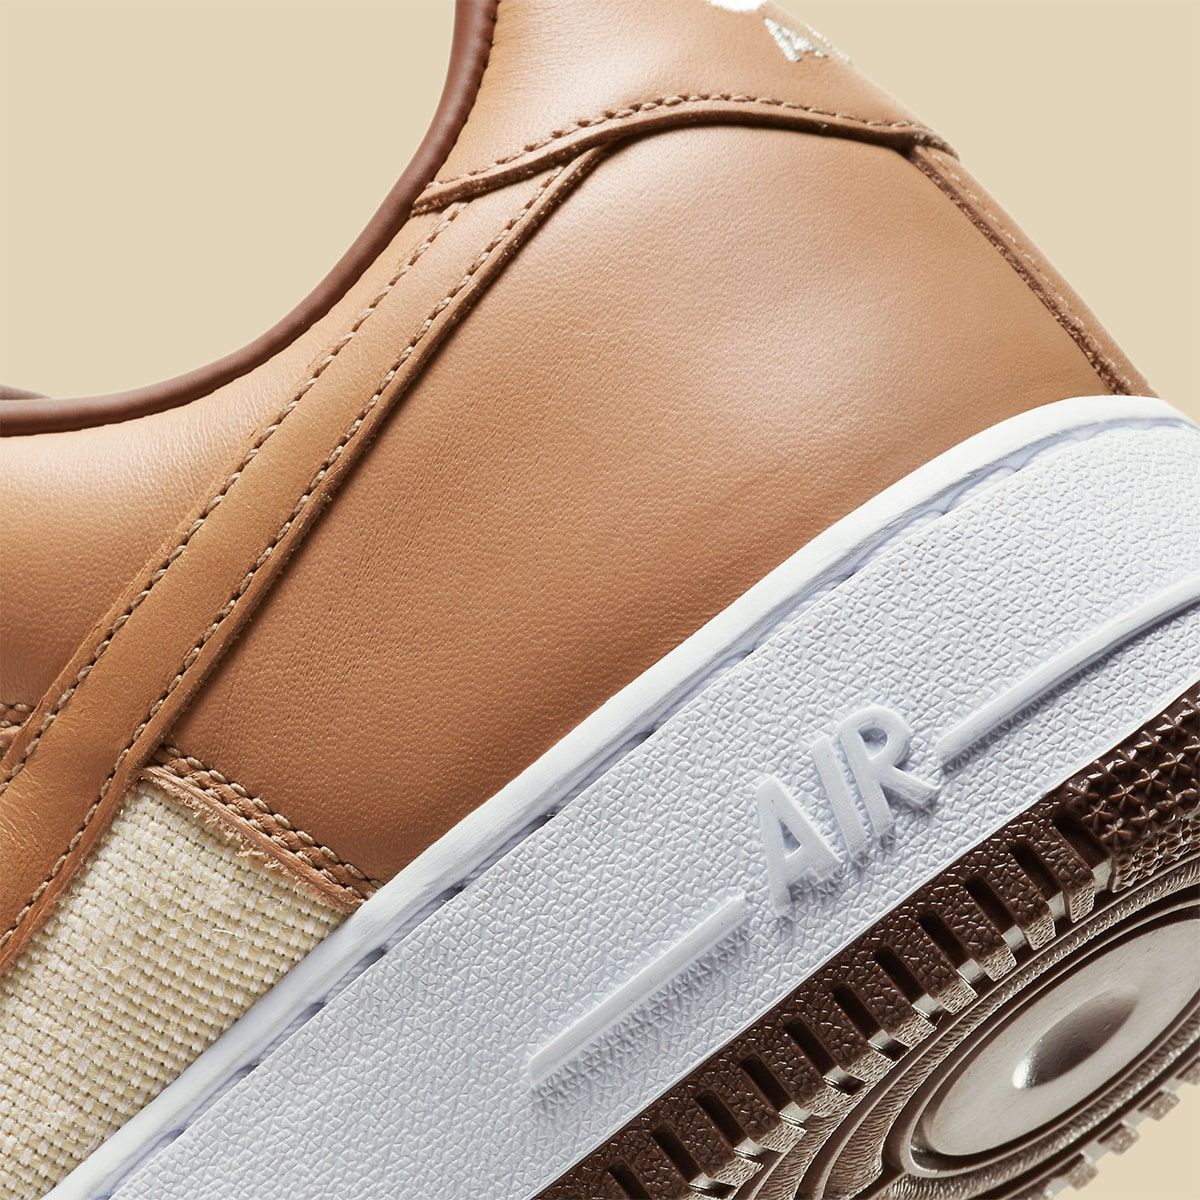 KITH x Nike Air Force 1 “Hawaii” Releases August 20th | HOUSE OF HEAT